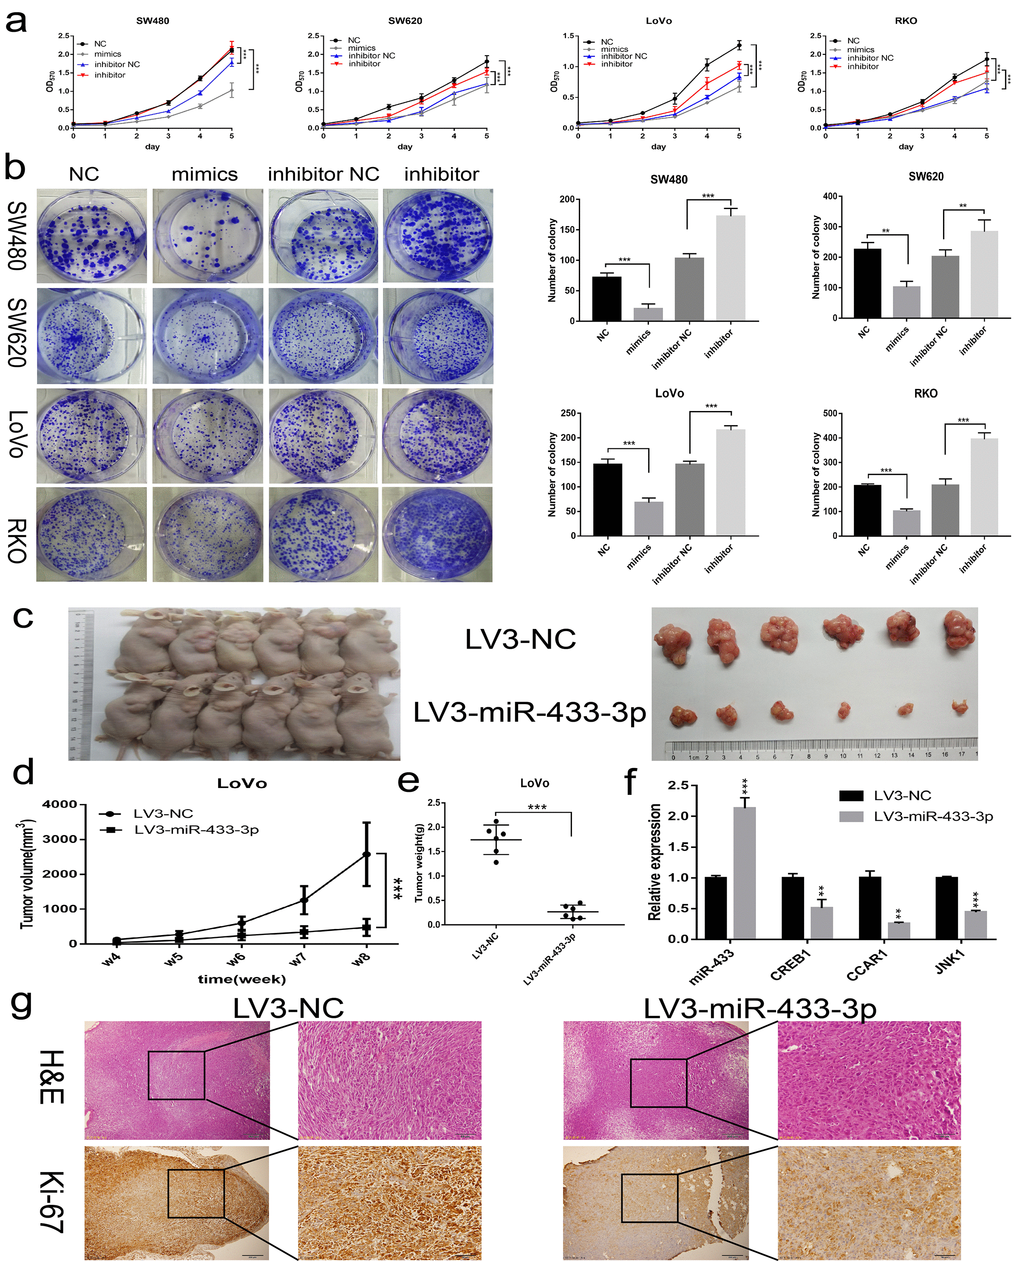 miR-433 inhibited CRC cell proliferation in vitro and in vivo. (a) MTT assays revealed that transfection of miR-433 mimics evidently suppressed the cell viability in SW480, SW620, LoVo and RKO cells, however, miR-433 inhibitor conspicuously enhanced the proliferative activity relative to inhibitor NC (NC, negative control; mimics, miR-433 mimics; inhibitor NC, negative control for inhibitor; inhibitor, inhibitor of miR-433). (b) Colony formation assays indicated that overexpression or knockdown of miR-433 prominently impeded or promoted CRC cell colony formation activity via transfection of the mimics or inhibitor of miR-433 (NC, negative control; mimics, miR-433 mimics; inhibitor NC, negative control for inhibitor; inhibitor, inhibitor of miR-433). (c) Subcutaneous tumors generated in nude mice which derived from LV3-NC- and LV3-miR-433-3p-infected LoVo cells are shown. (d) ANOVA of repeated measurements confirmed that the LoVo/LV3-miR-433-3p group showed much feebler growth than its counterpart. (e) A t test demonstrated a significant difference in tumor weight between the LoVo/LV3-miR-433-3p group and its counterpart. (f) Real-time PCR indicated that miR-433 was upregulated in LoVo/LV3-miR-433-3p tumors, and subsequently, a dramatic decline in CREB1, CCAR1 and JNK1 was observed. (g) H&E and Ki-67 staining of tumors initiated from LoVo/LV3-NC and LoVo/LV3-miR-433-3p cells. **, pp